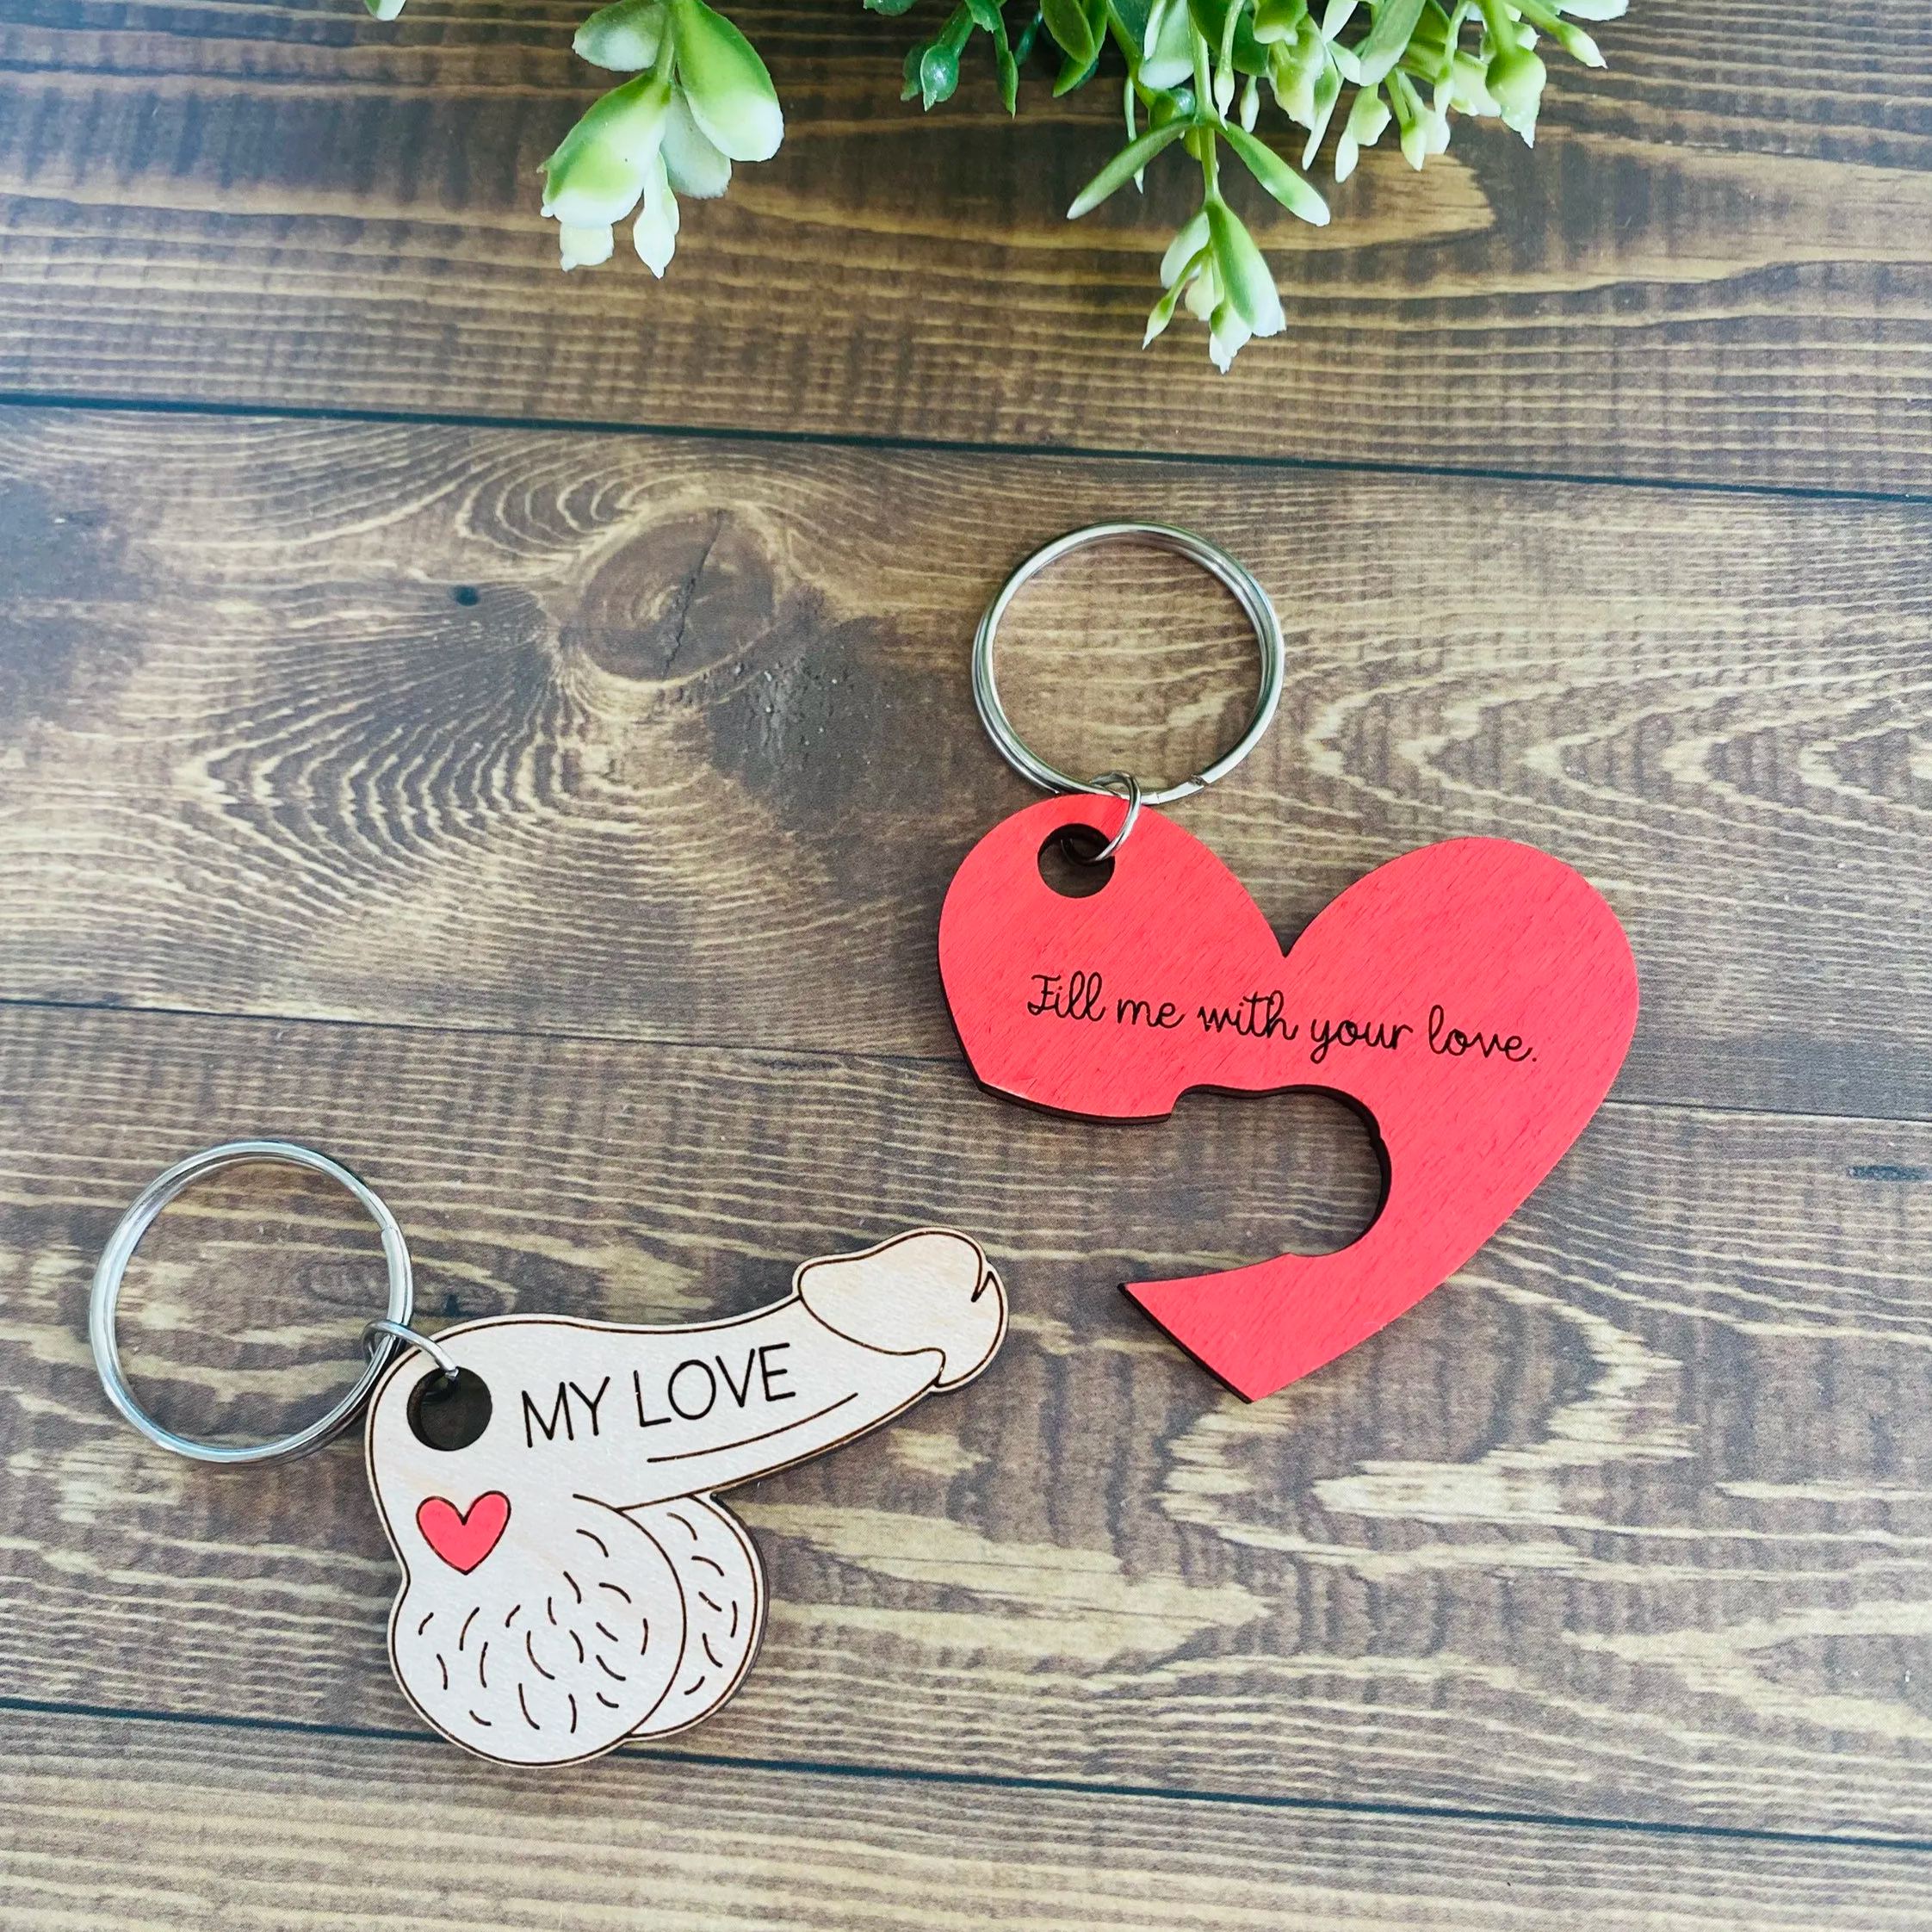 Funny Inappropriate Keychain Gift